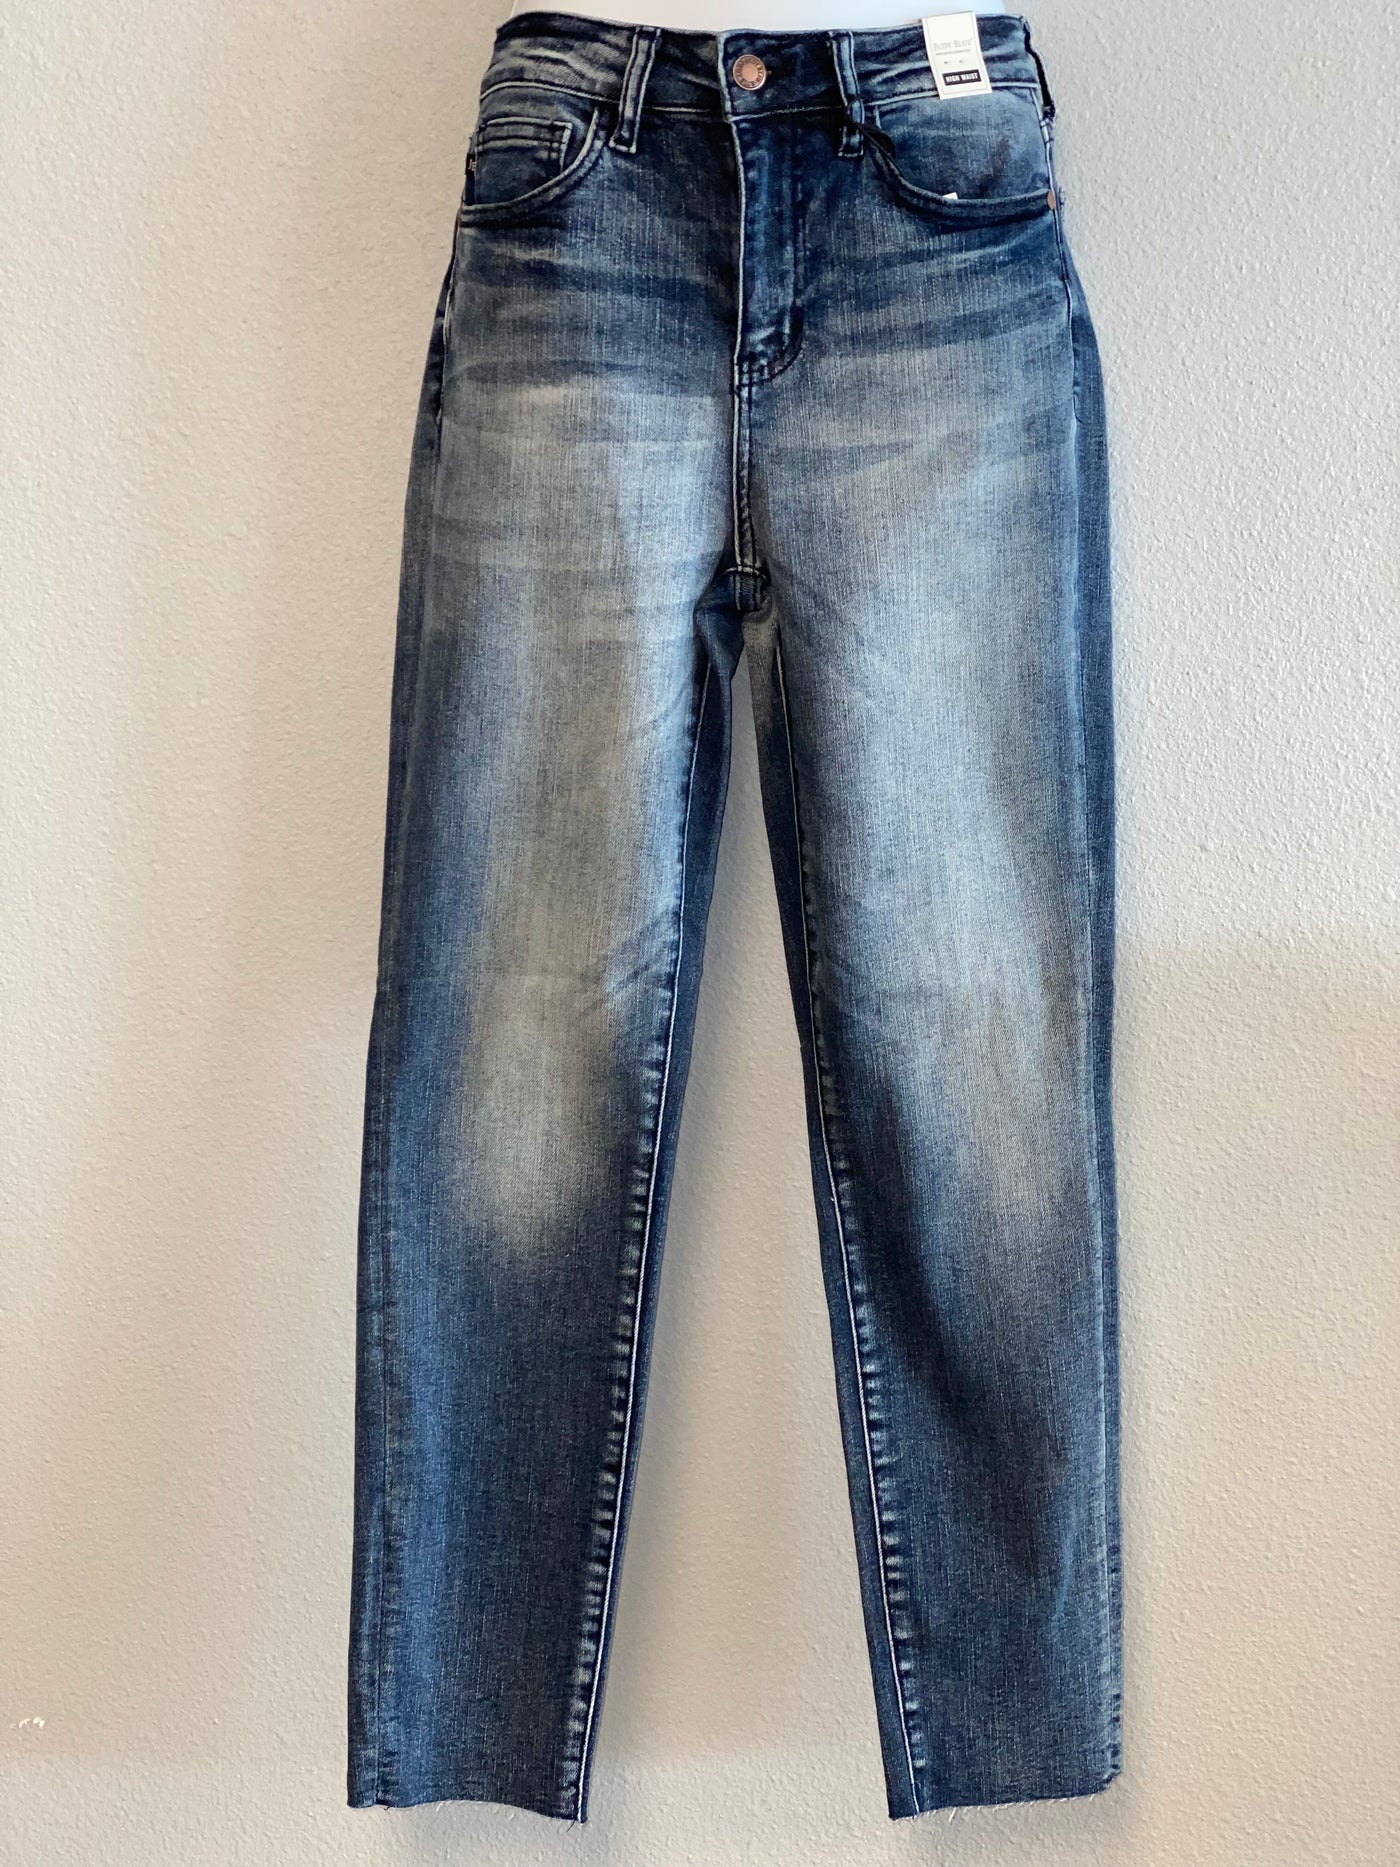 Judy Blue Faded Jeans